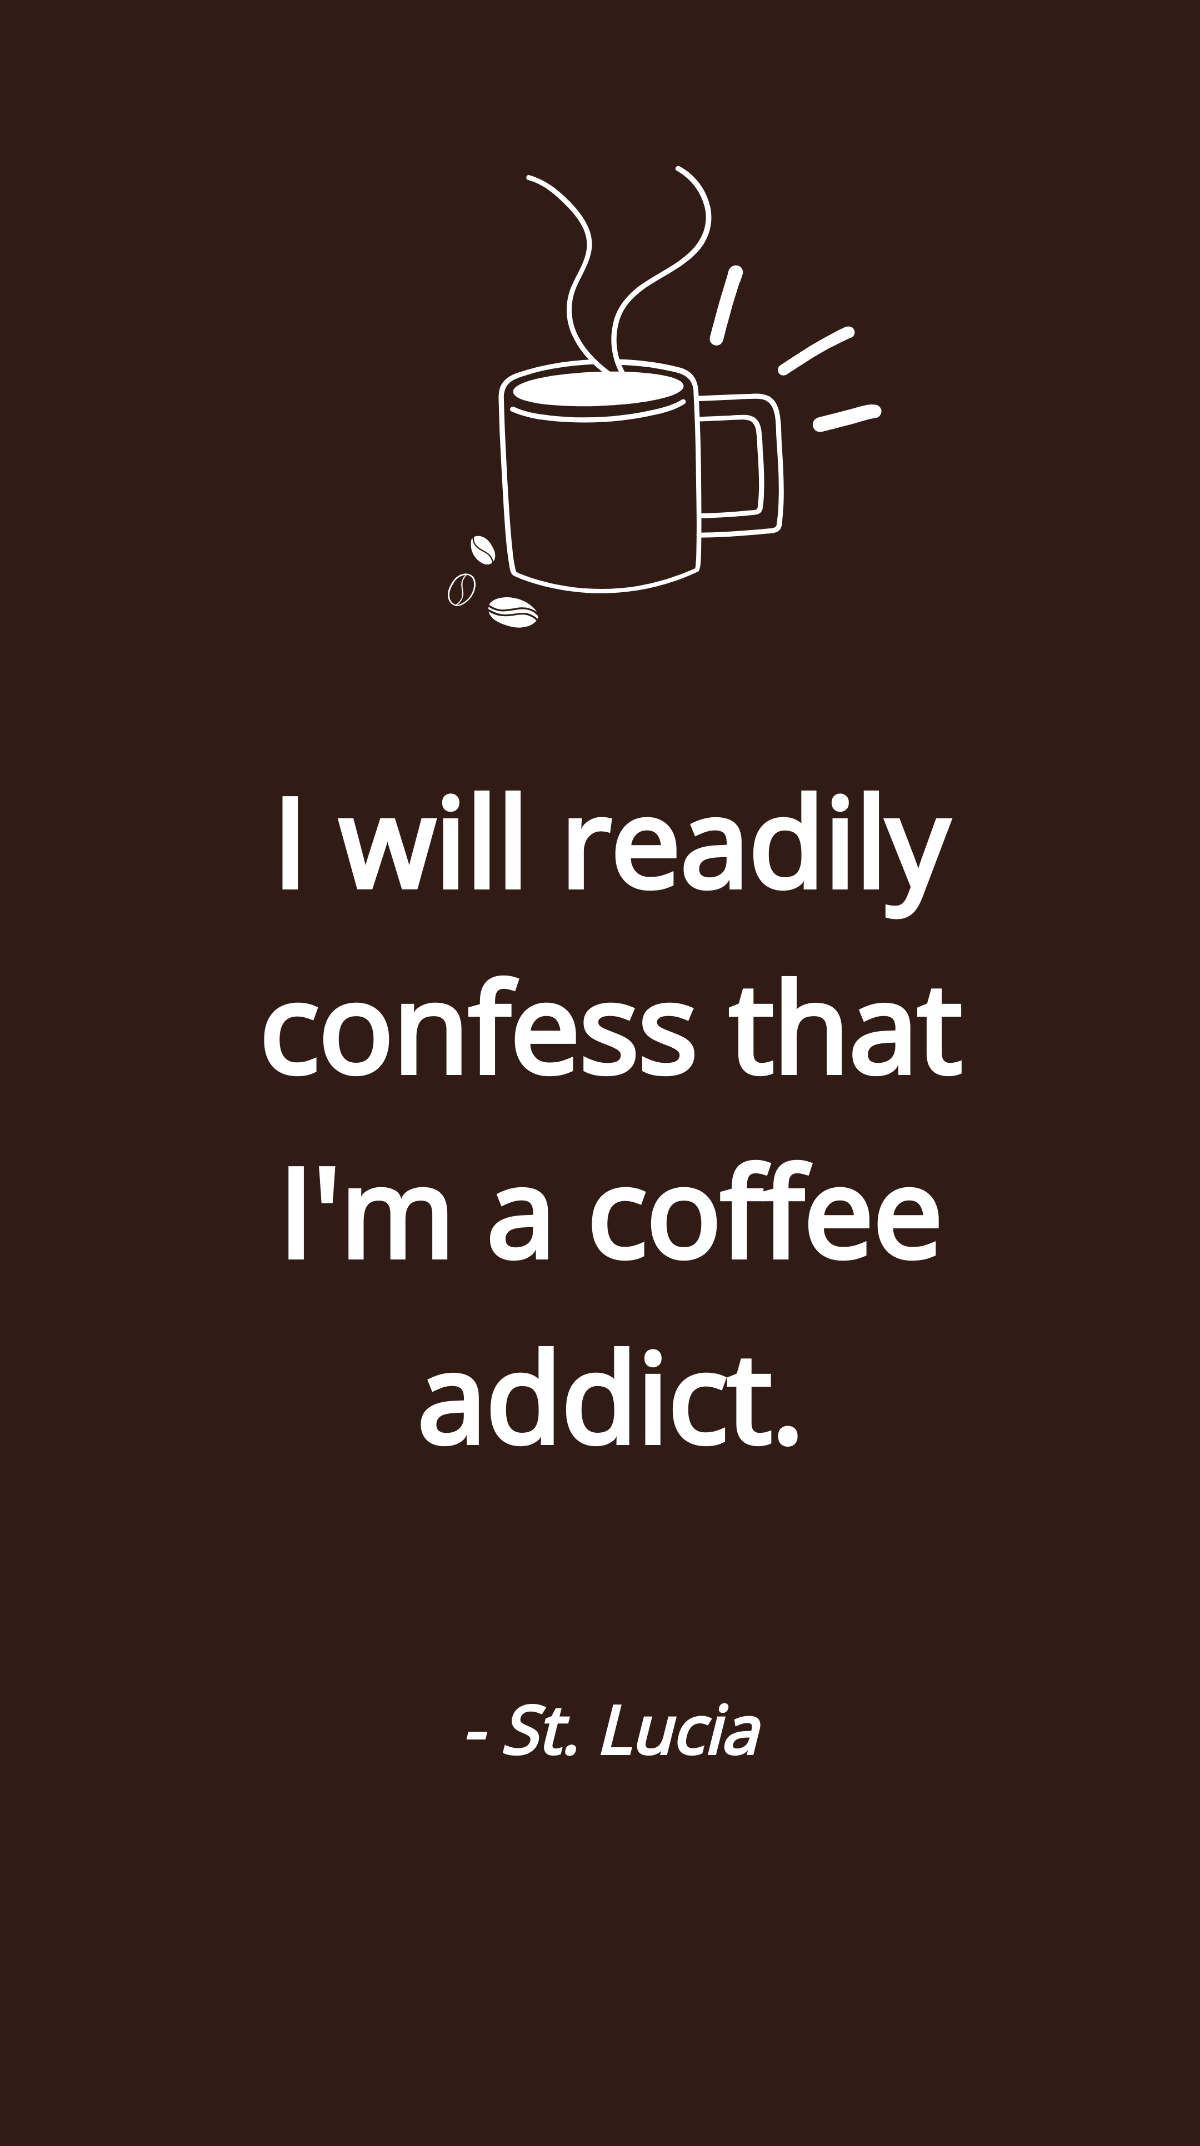 Free St. Lucia - I will readily confess that I'm a coffee addict. Template